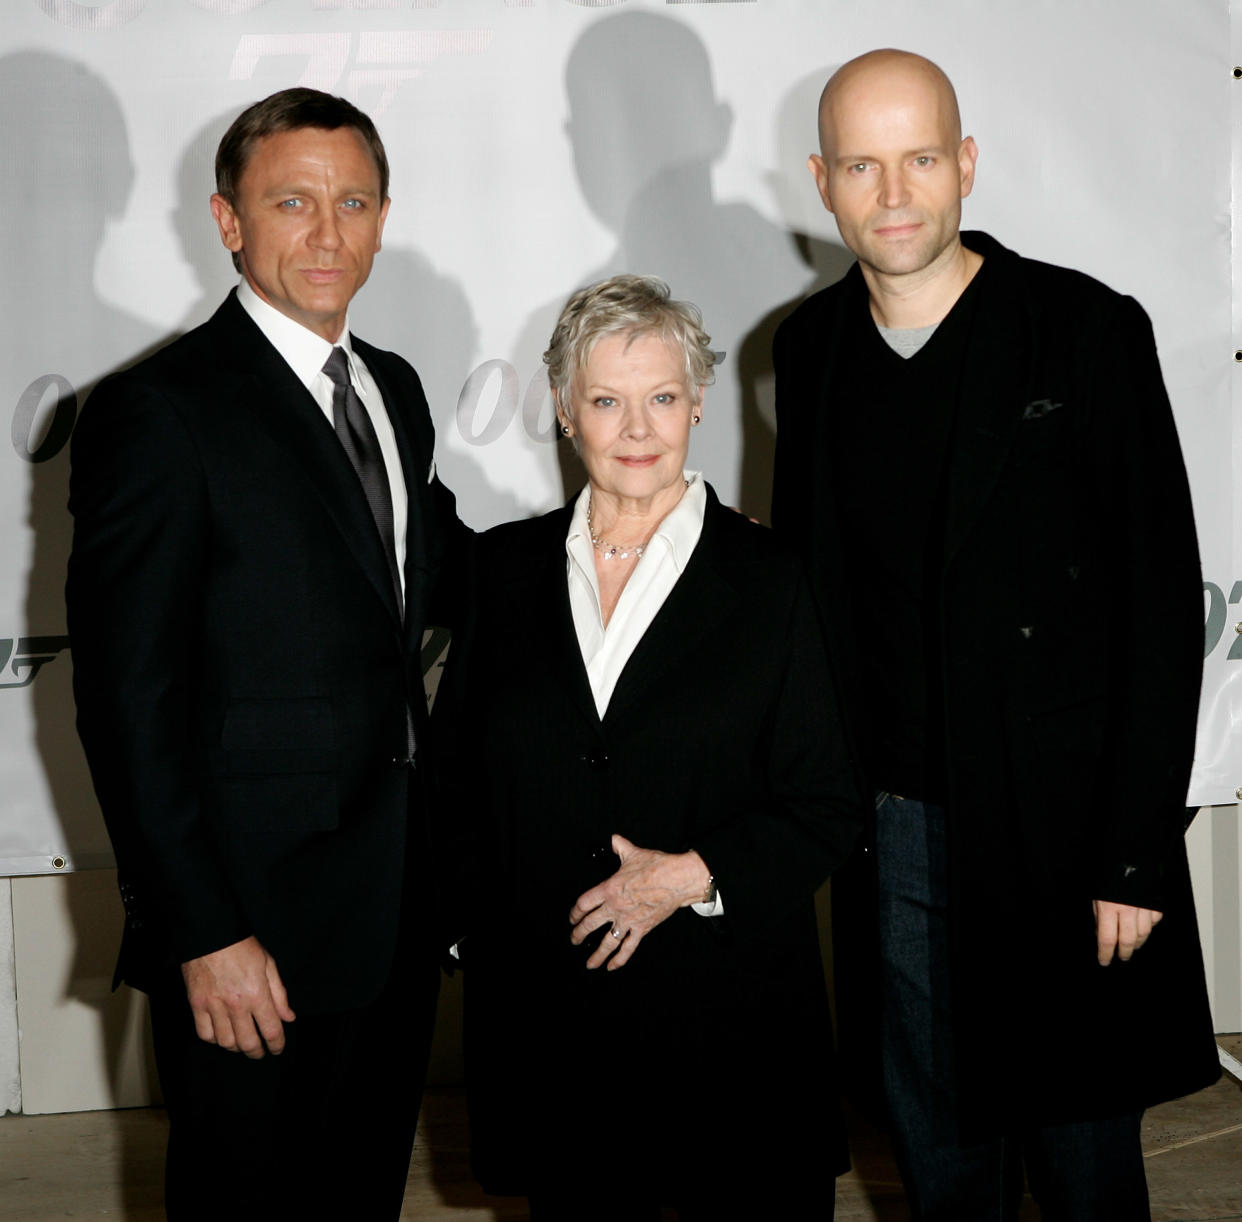 LONDON - JANUARY 24:  Actors Daniel Craig (L) and Dame Judi Dench and director Marc Forster attend a photocall to celebrate the start of production of the 22nd James Bond film 'Quantum of Solace' at Pinewood Studios on January 24, 2007 near London, England.  (Photo by Rosie Greenway/Getty Images)